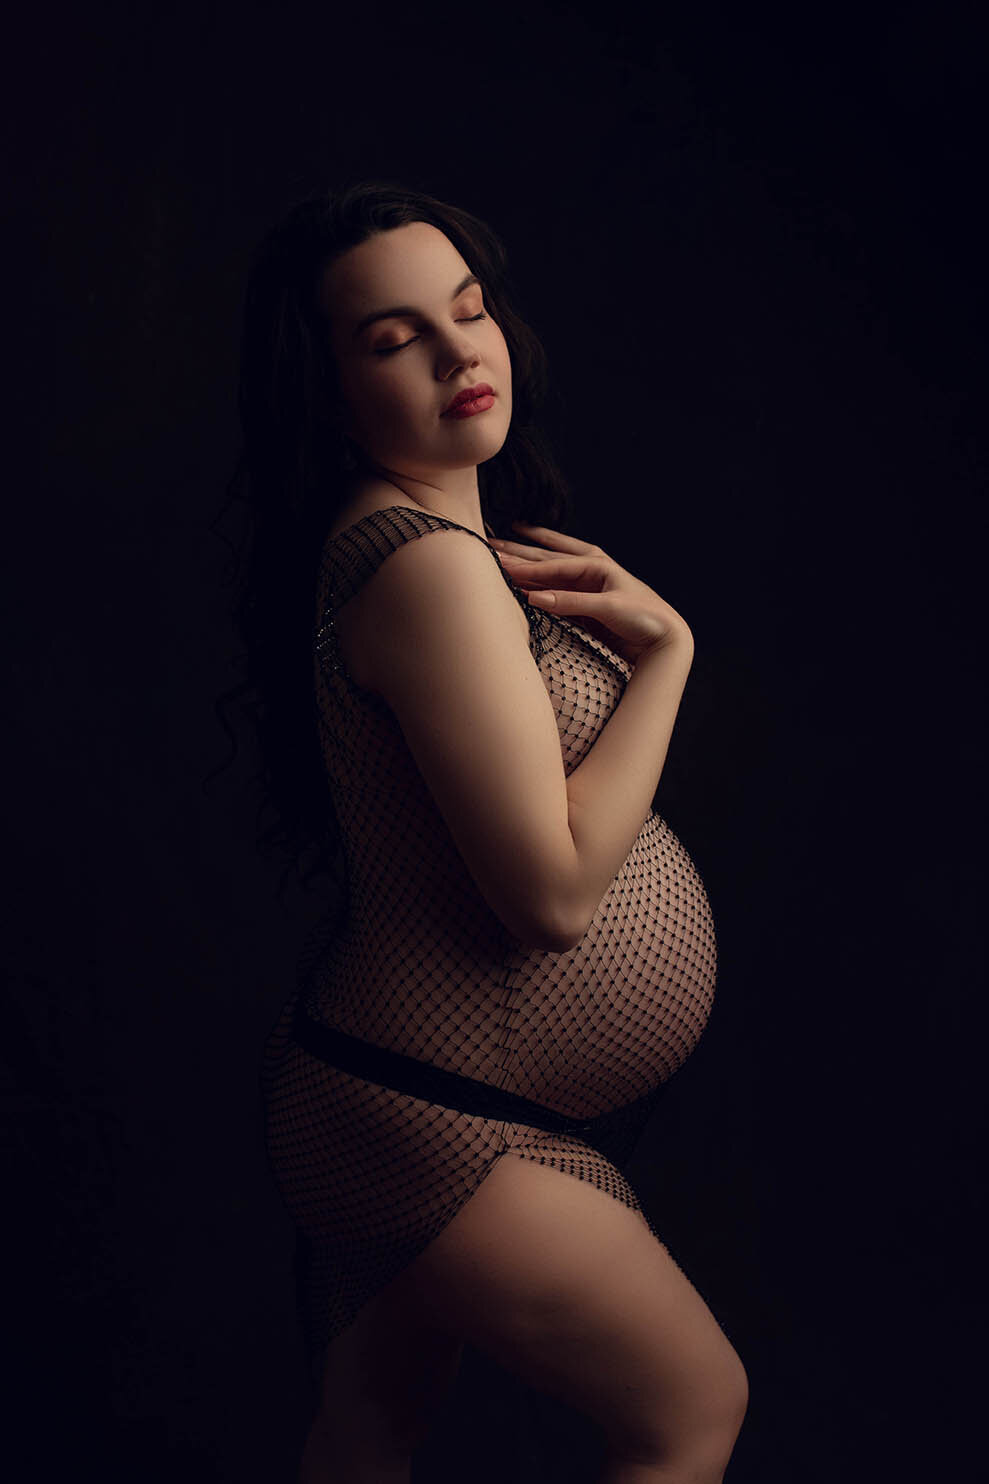 a dramatically lit photo of a pregnant woman wearing a rhinestone dress with nothing underneath